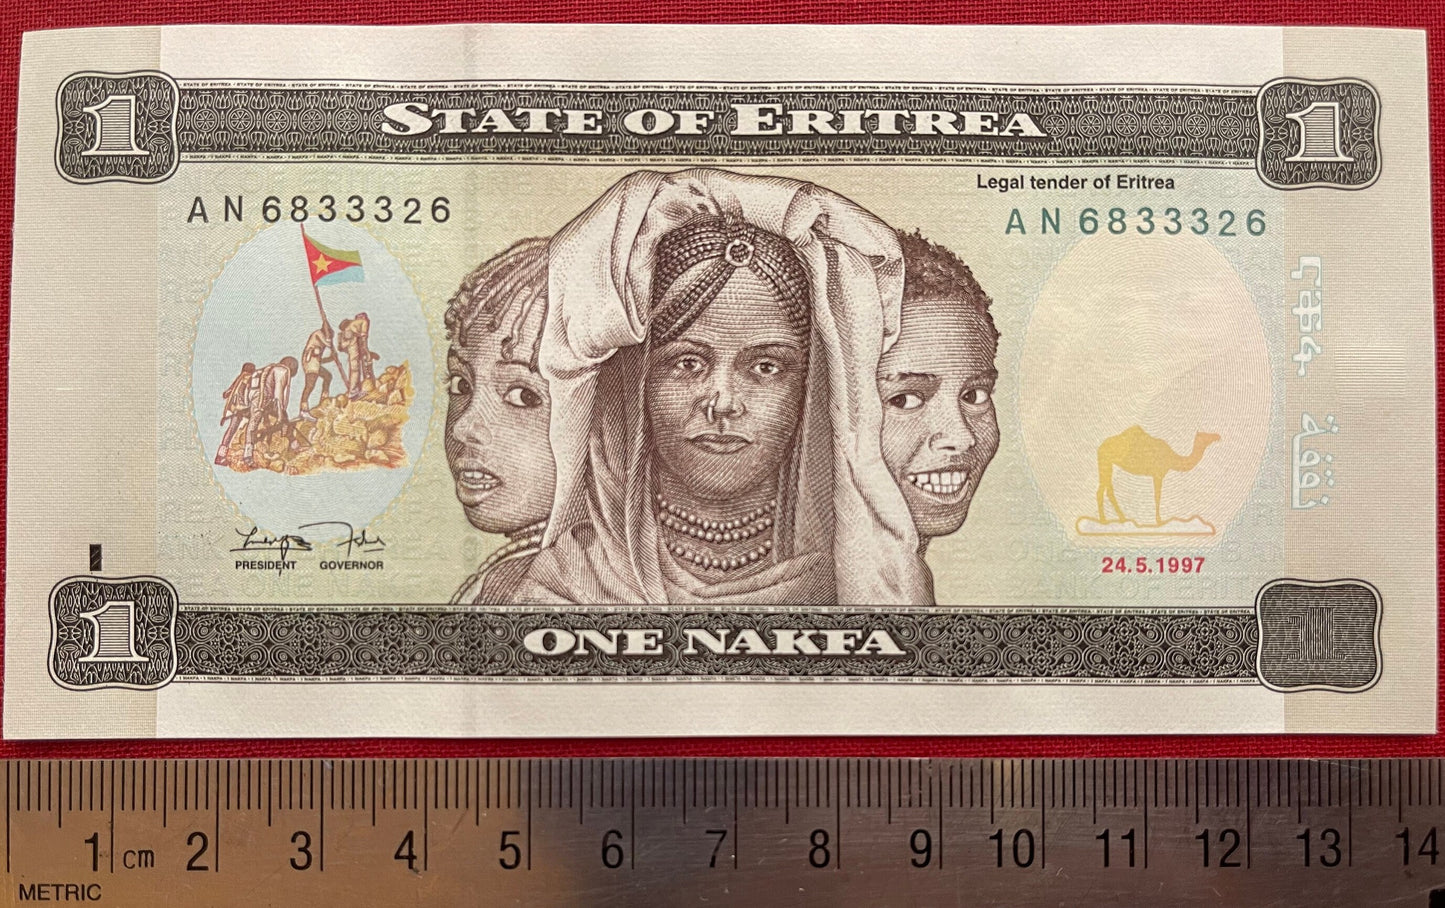 Youth Reading Books & Three Girls 1 Nafka Eritrea Authentic Banknote Money for Jewelry and Collage (Clarence Holbert) (Camel) Black Lives